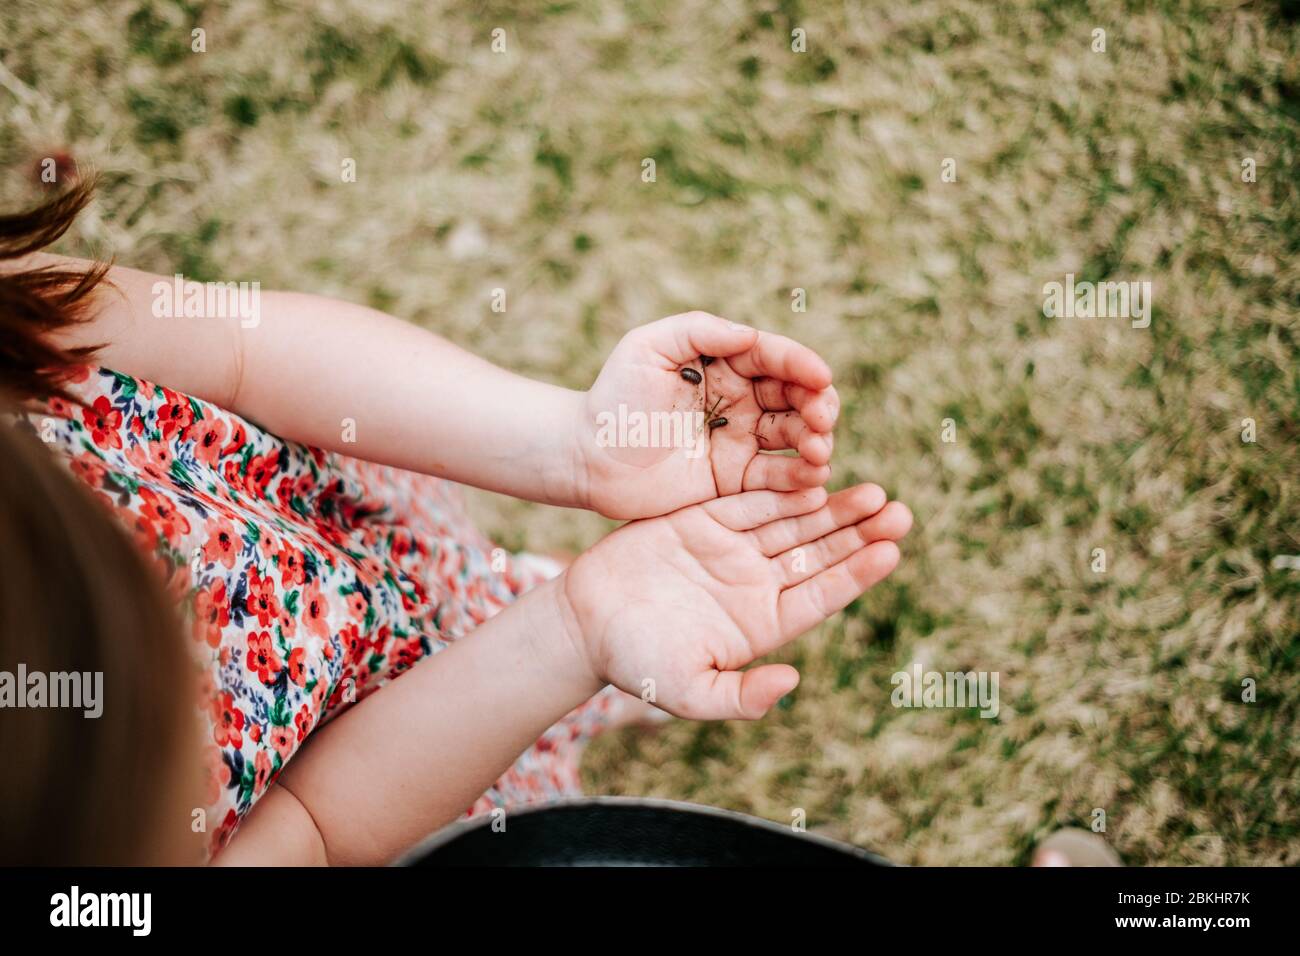 cropped image of young girl holding bugs in her hands Stock Photo